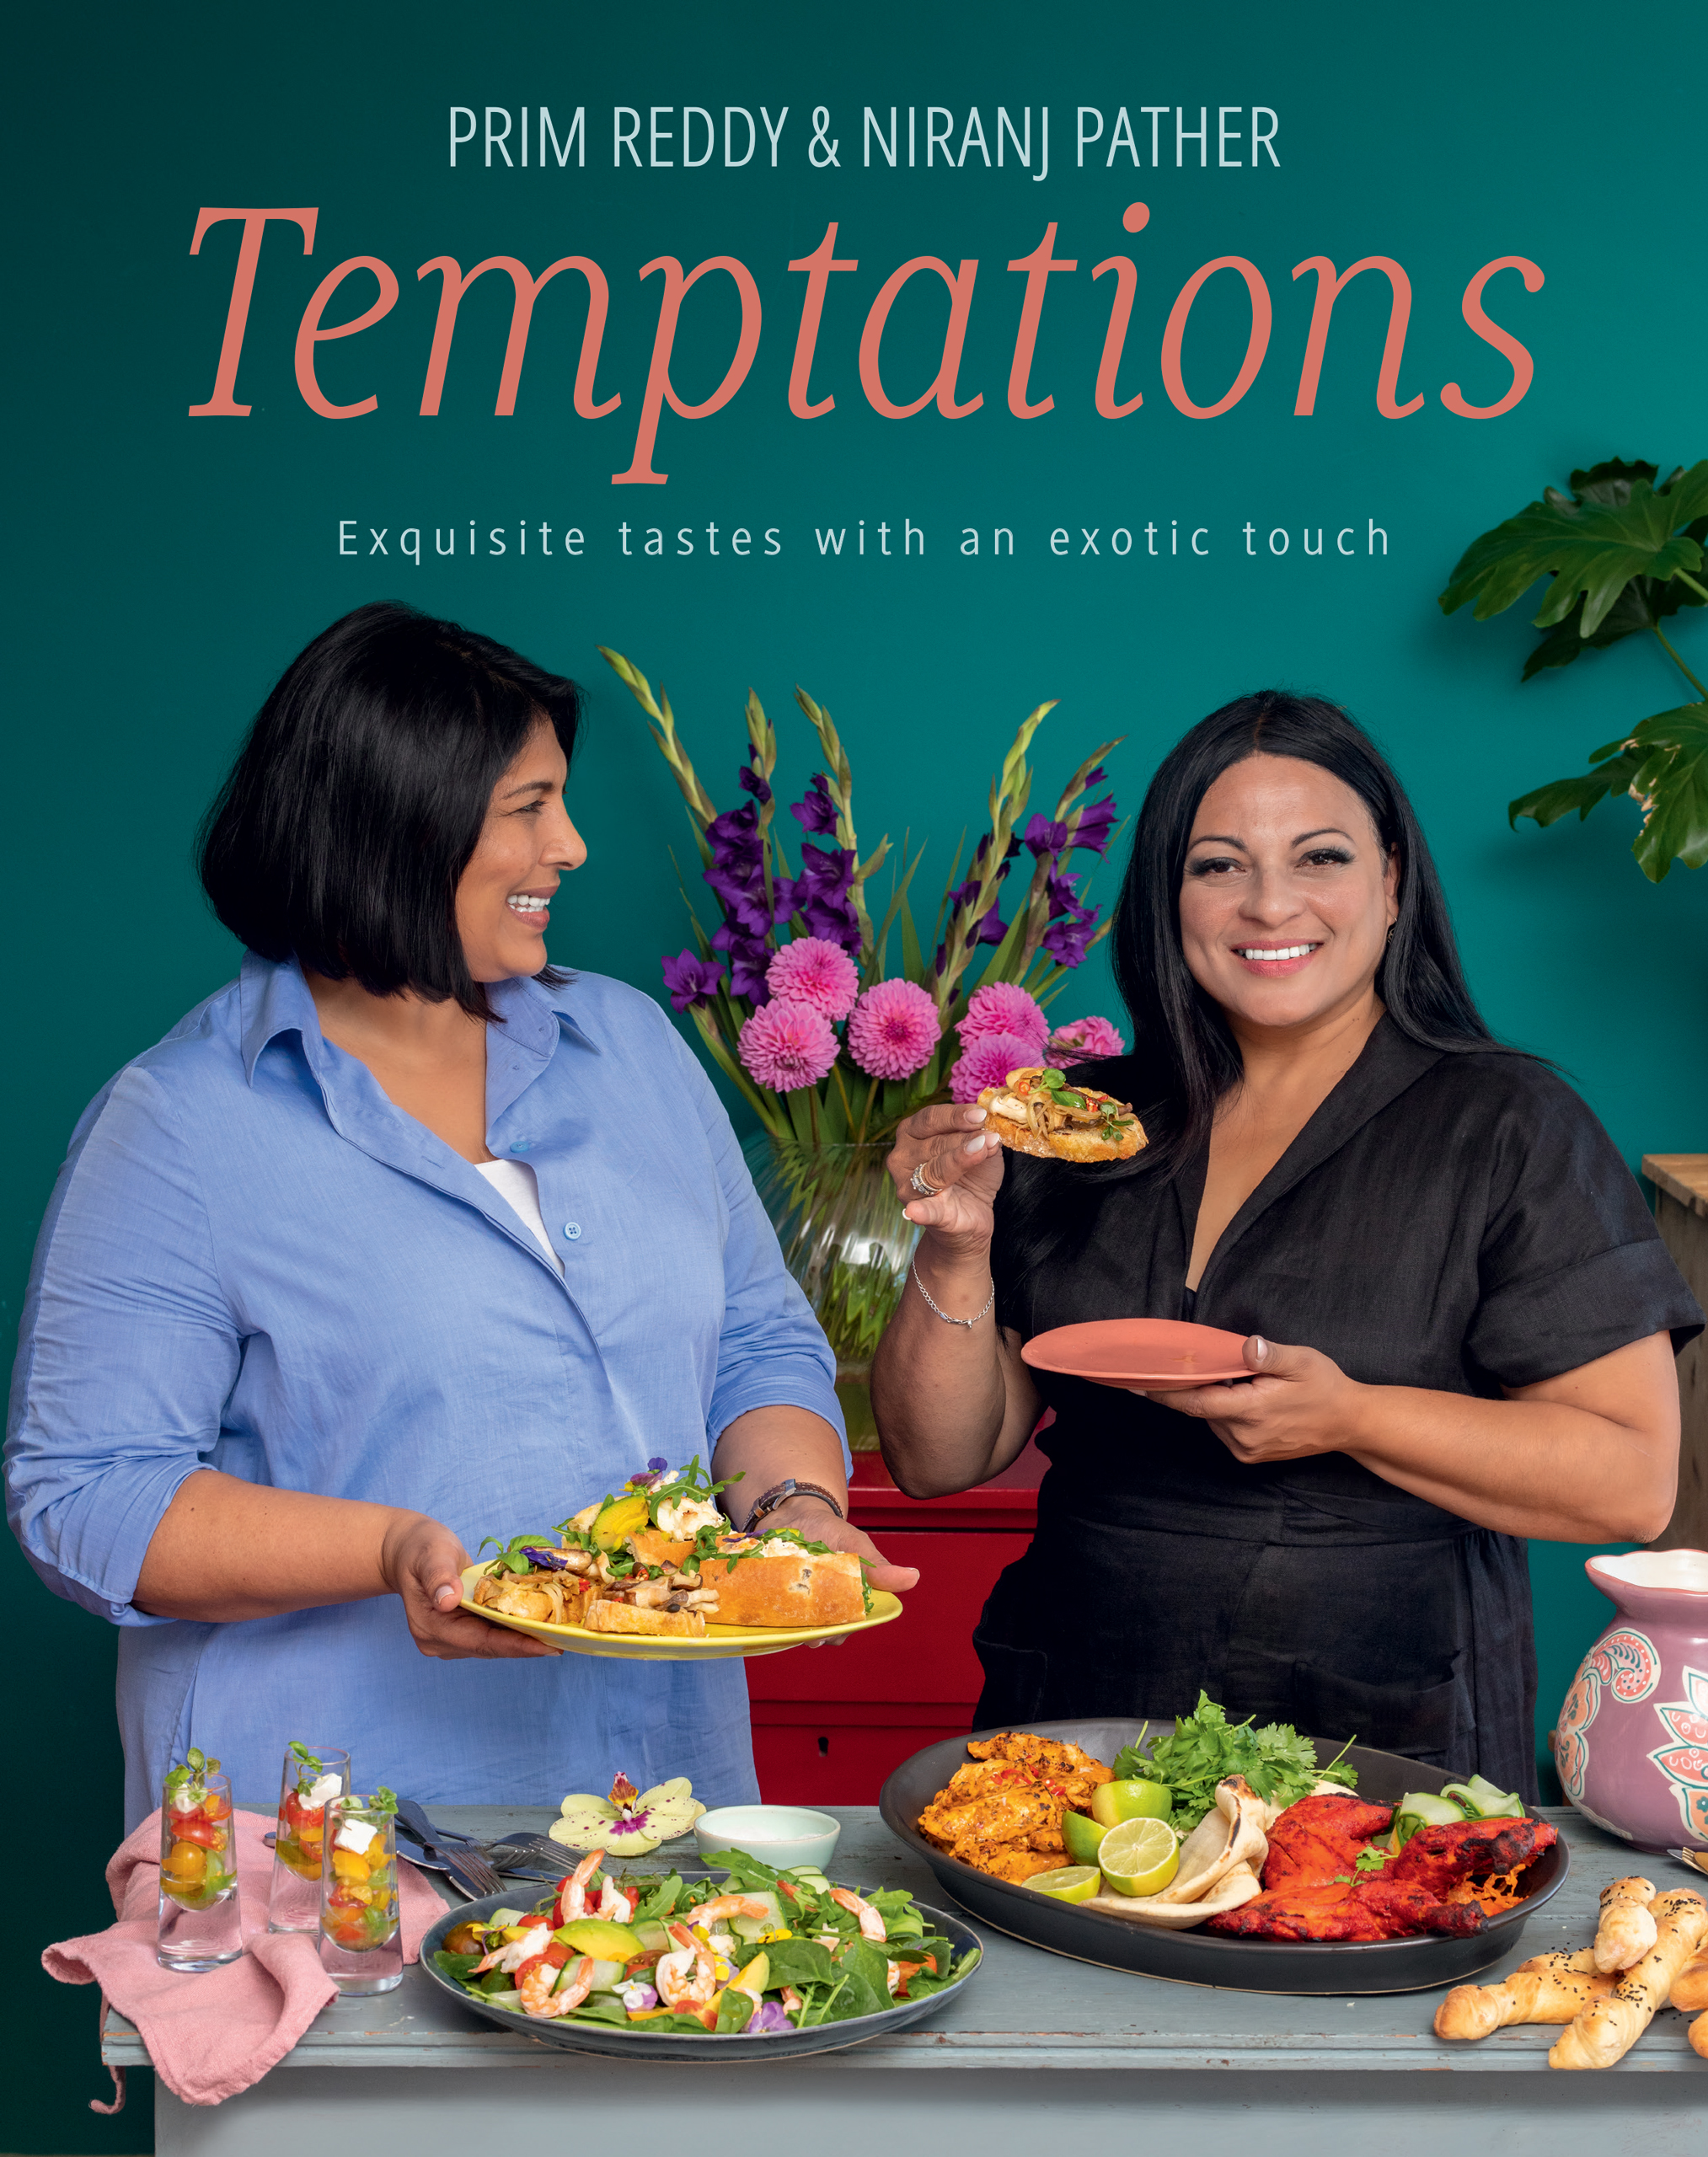 Details of the book - Temptations. 